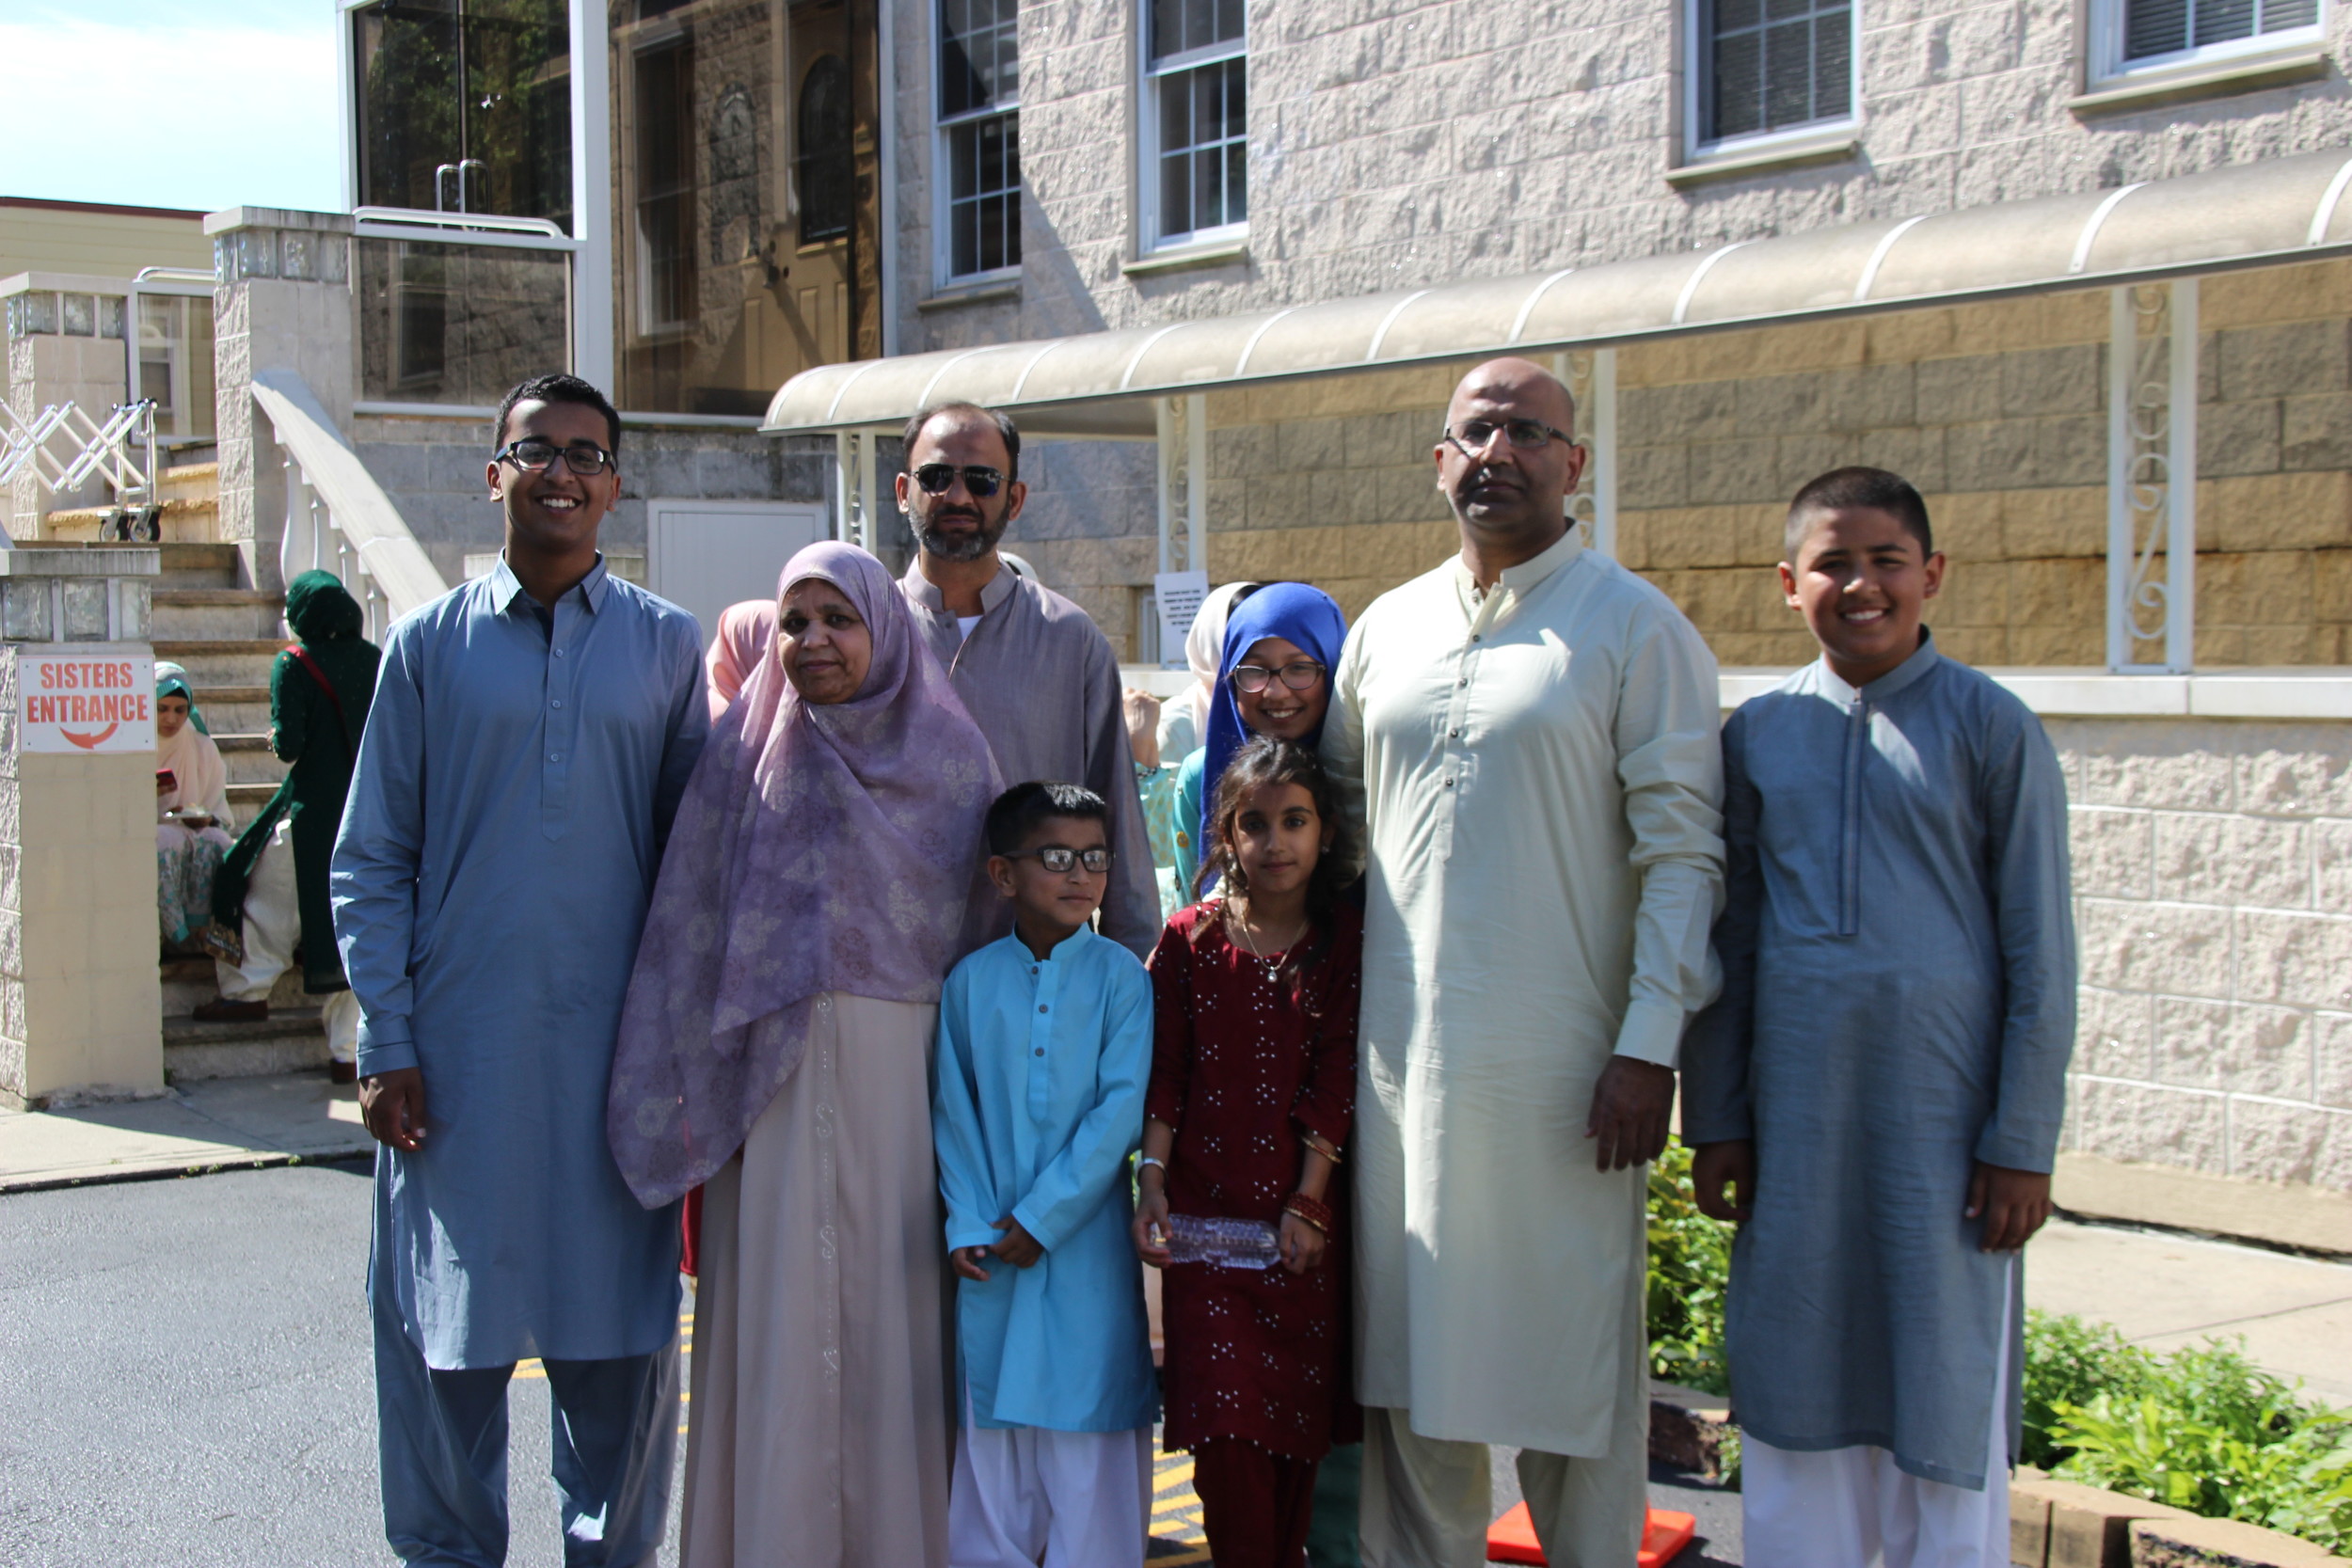 A family of former Valley Streamers — now Texans — visited family for Eid al-Fitr at the mosque.